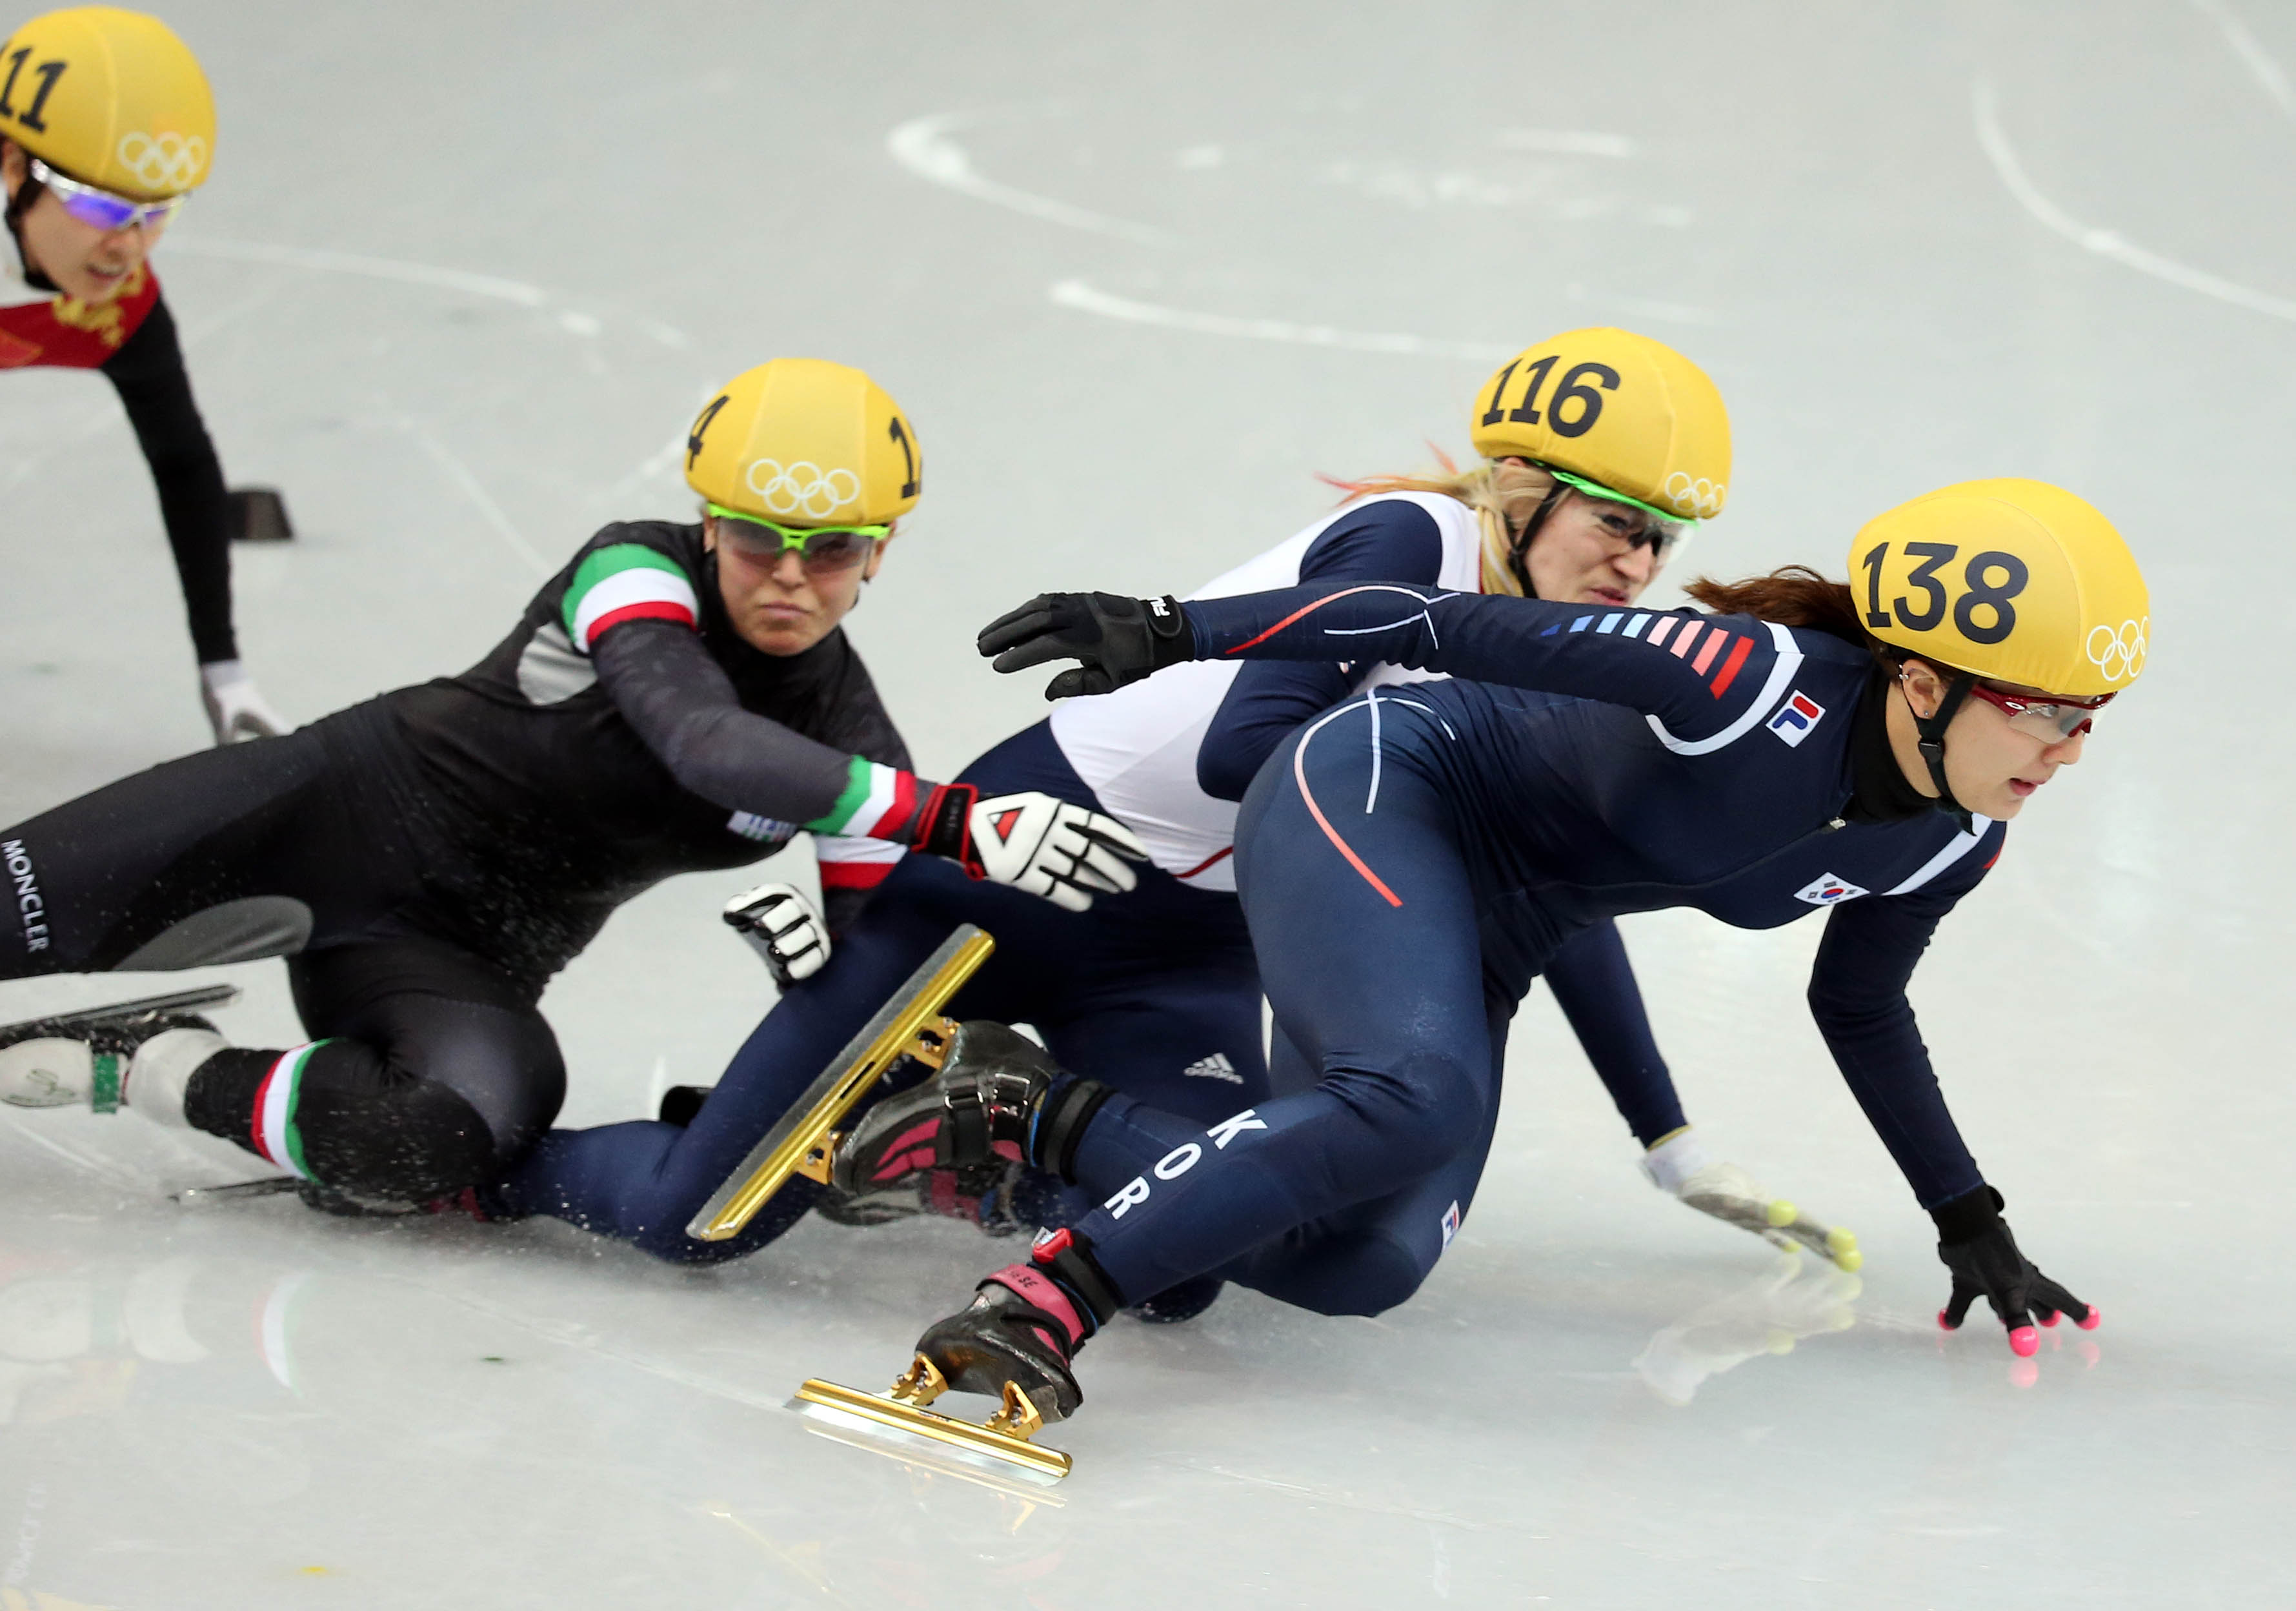 Korea’s Park Seung-hi, right, had the lead when she was pushed from behind. Britain’s Elise Christie was placed last for causing the crash. (Yonhap)